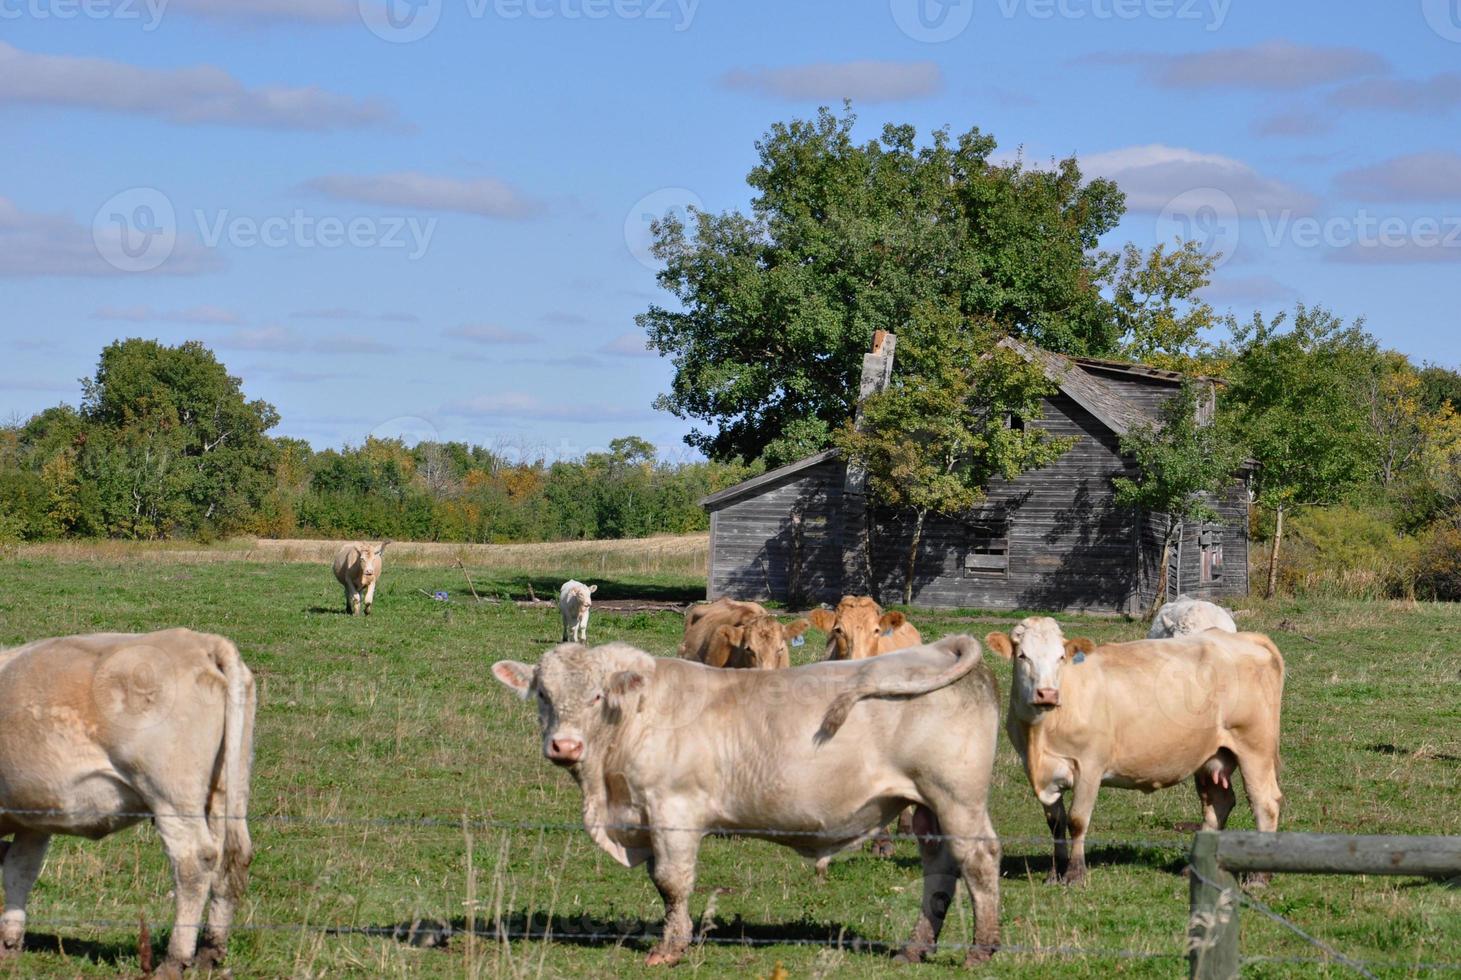 Curious herd of cattle approaches a fence photo